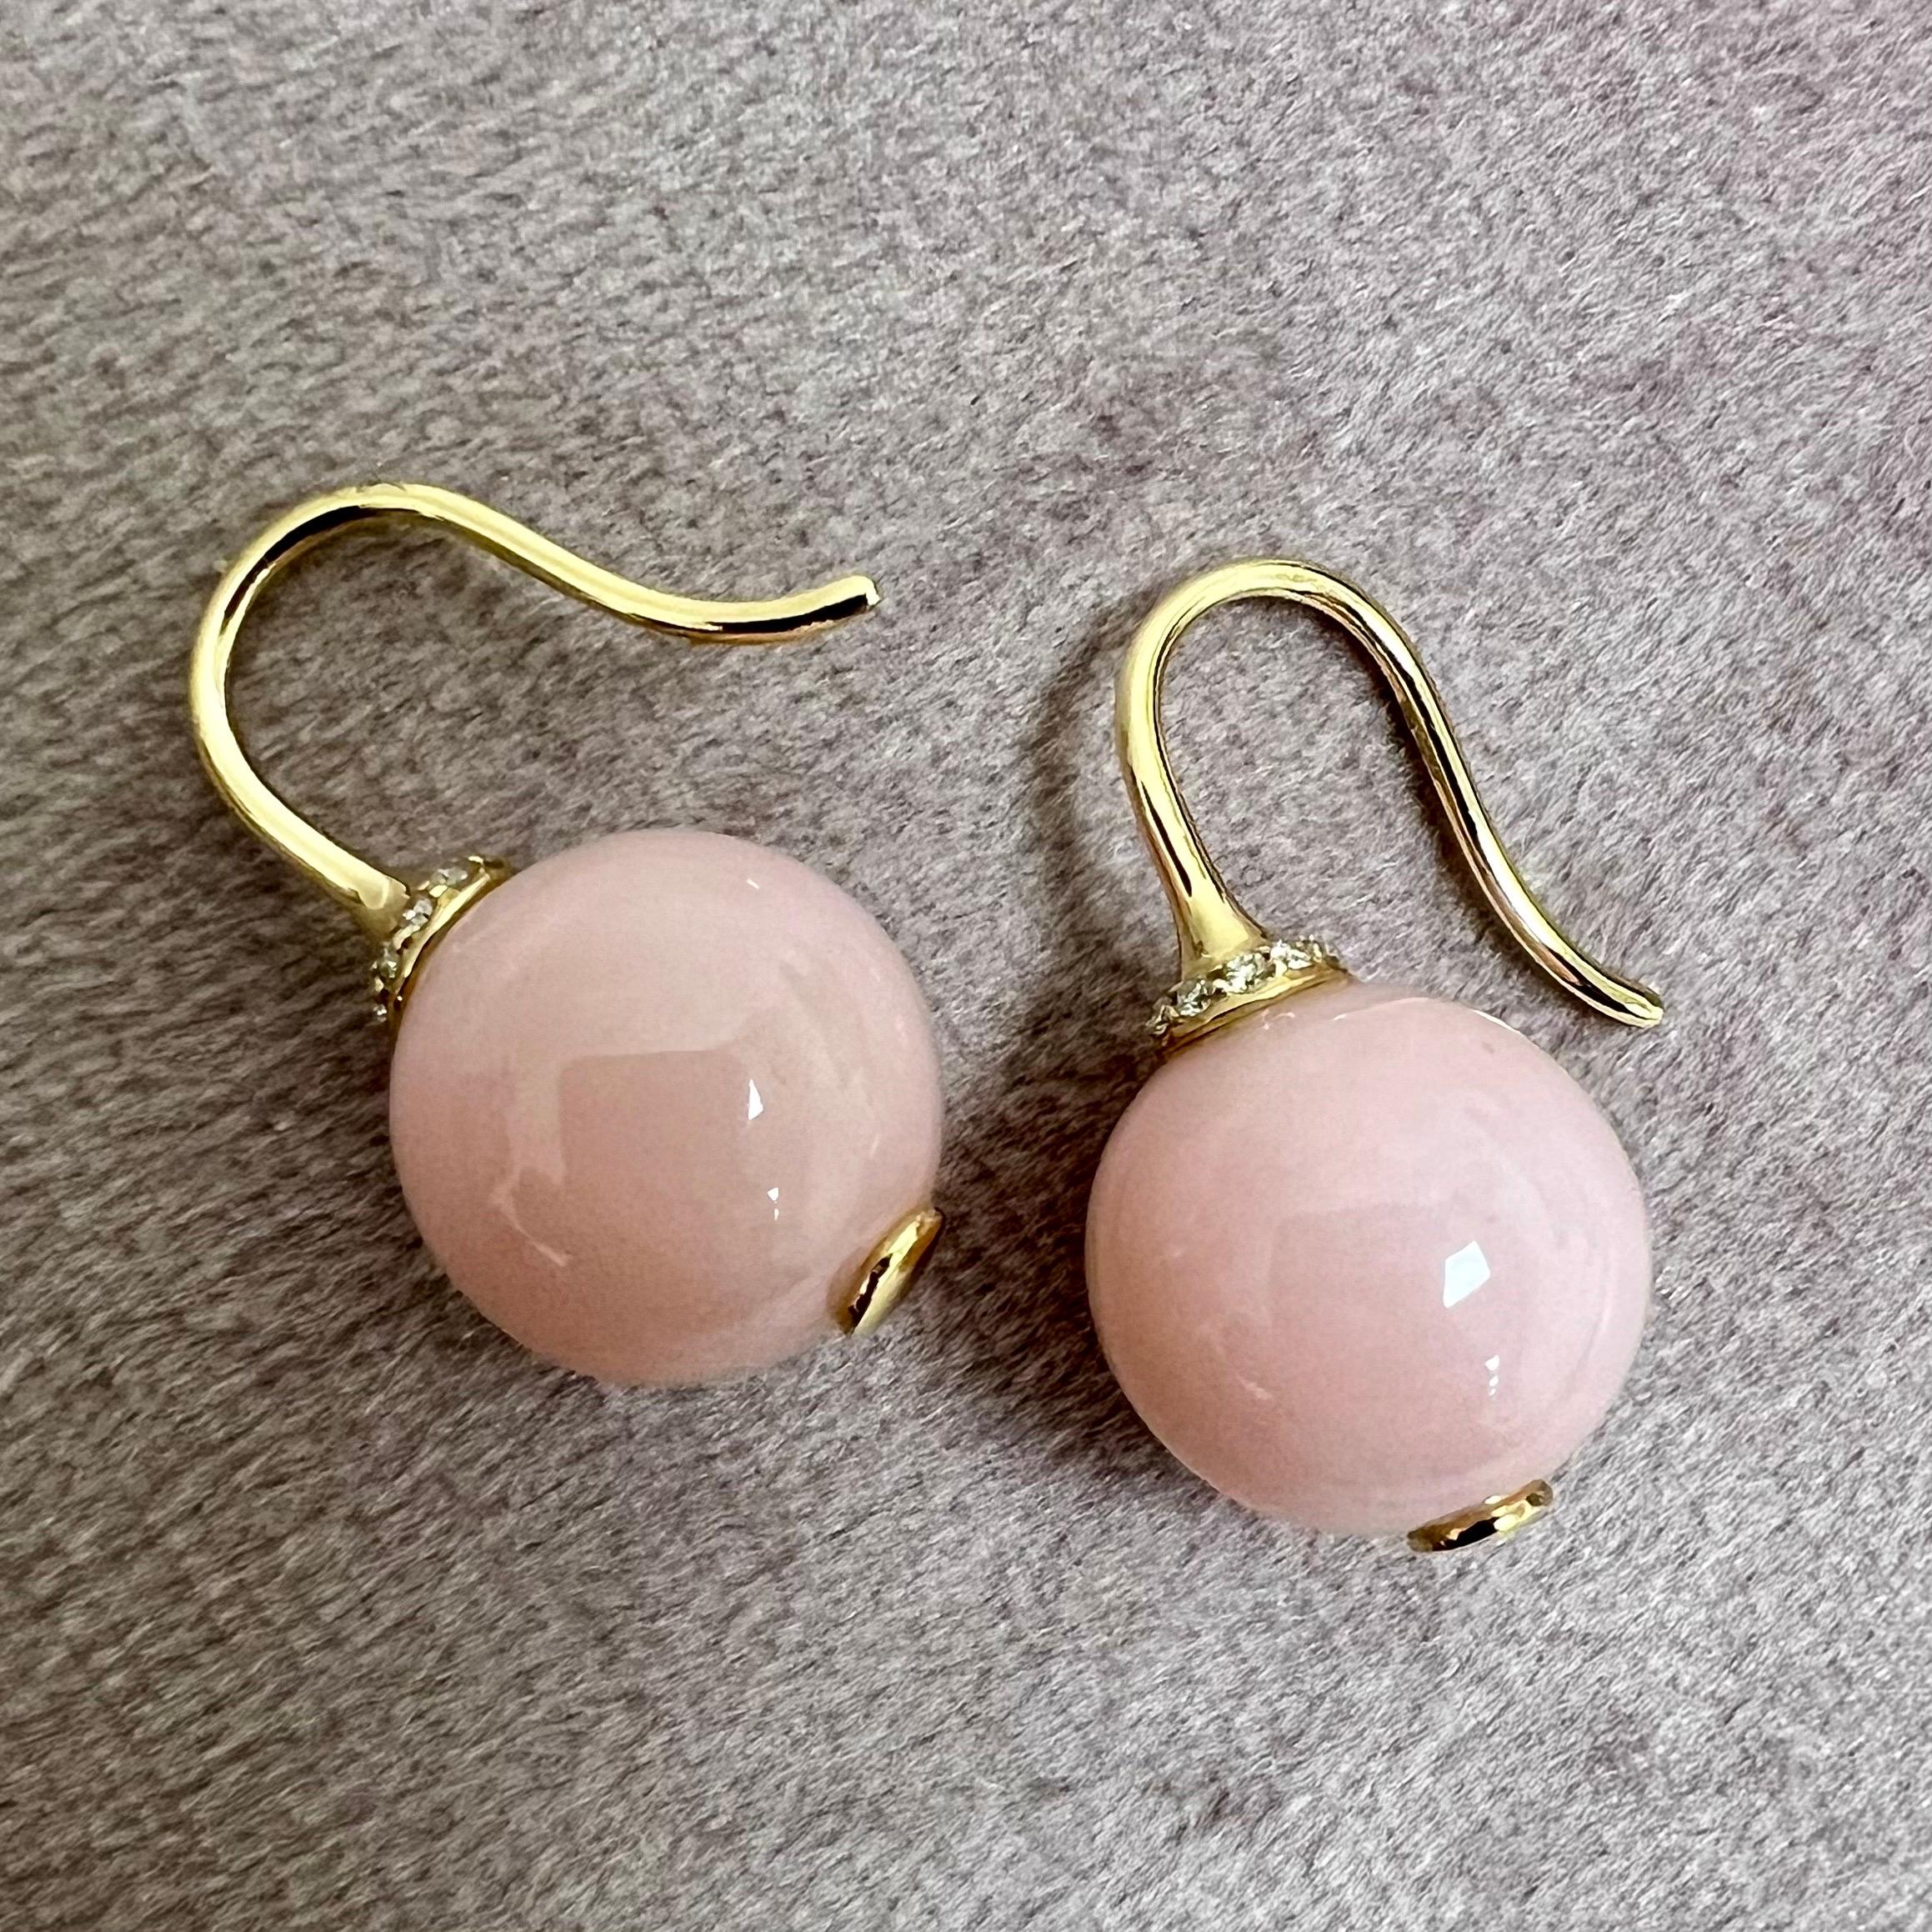 Created in 18 karat yellow gold
Pink Opal beads 10.5 carats approx.
Diamonds 0.10 carat approx.
Limited edition

Crafted from 18 karat yellow gold, these limited edition earrings feature glimmering pink opal beads estimated at 10.5 carats, and